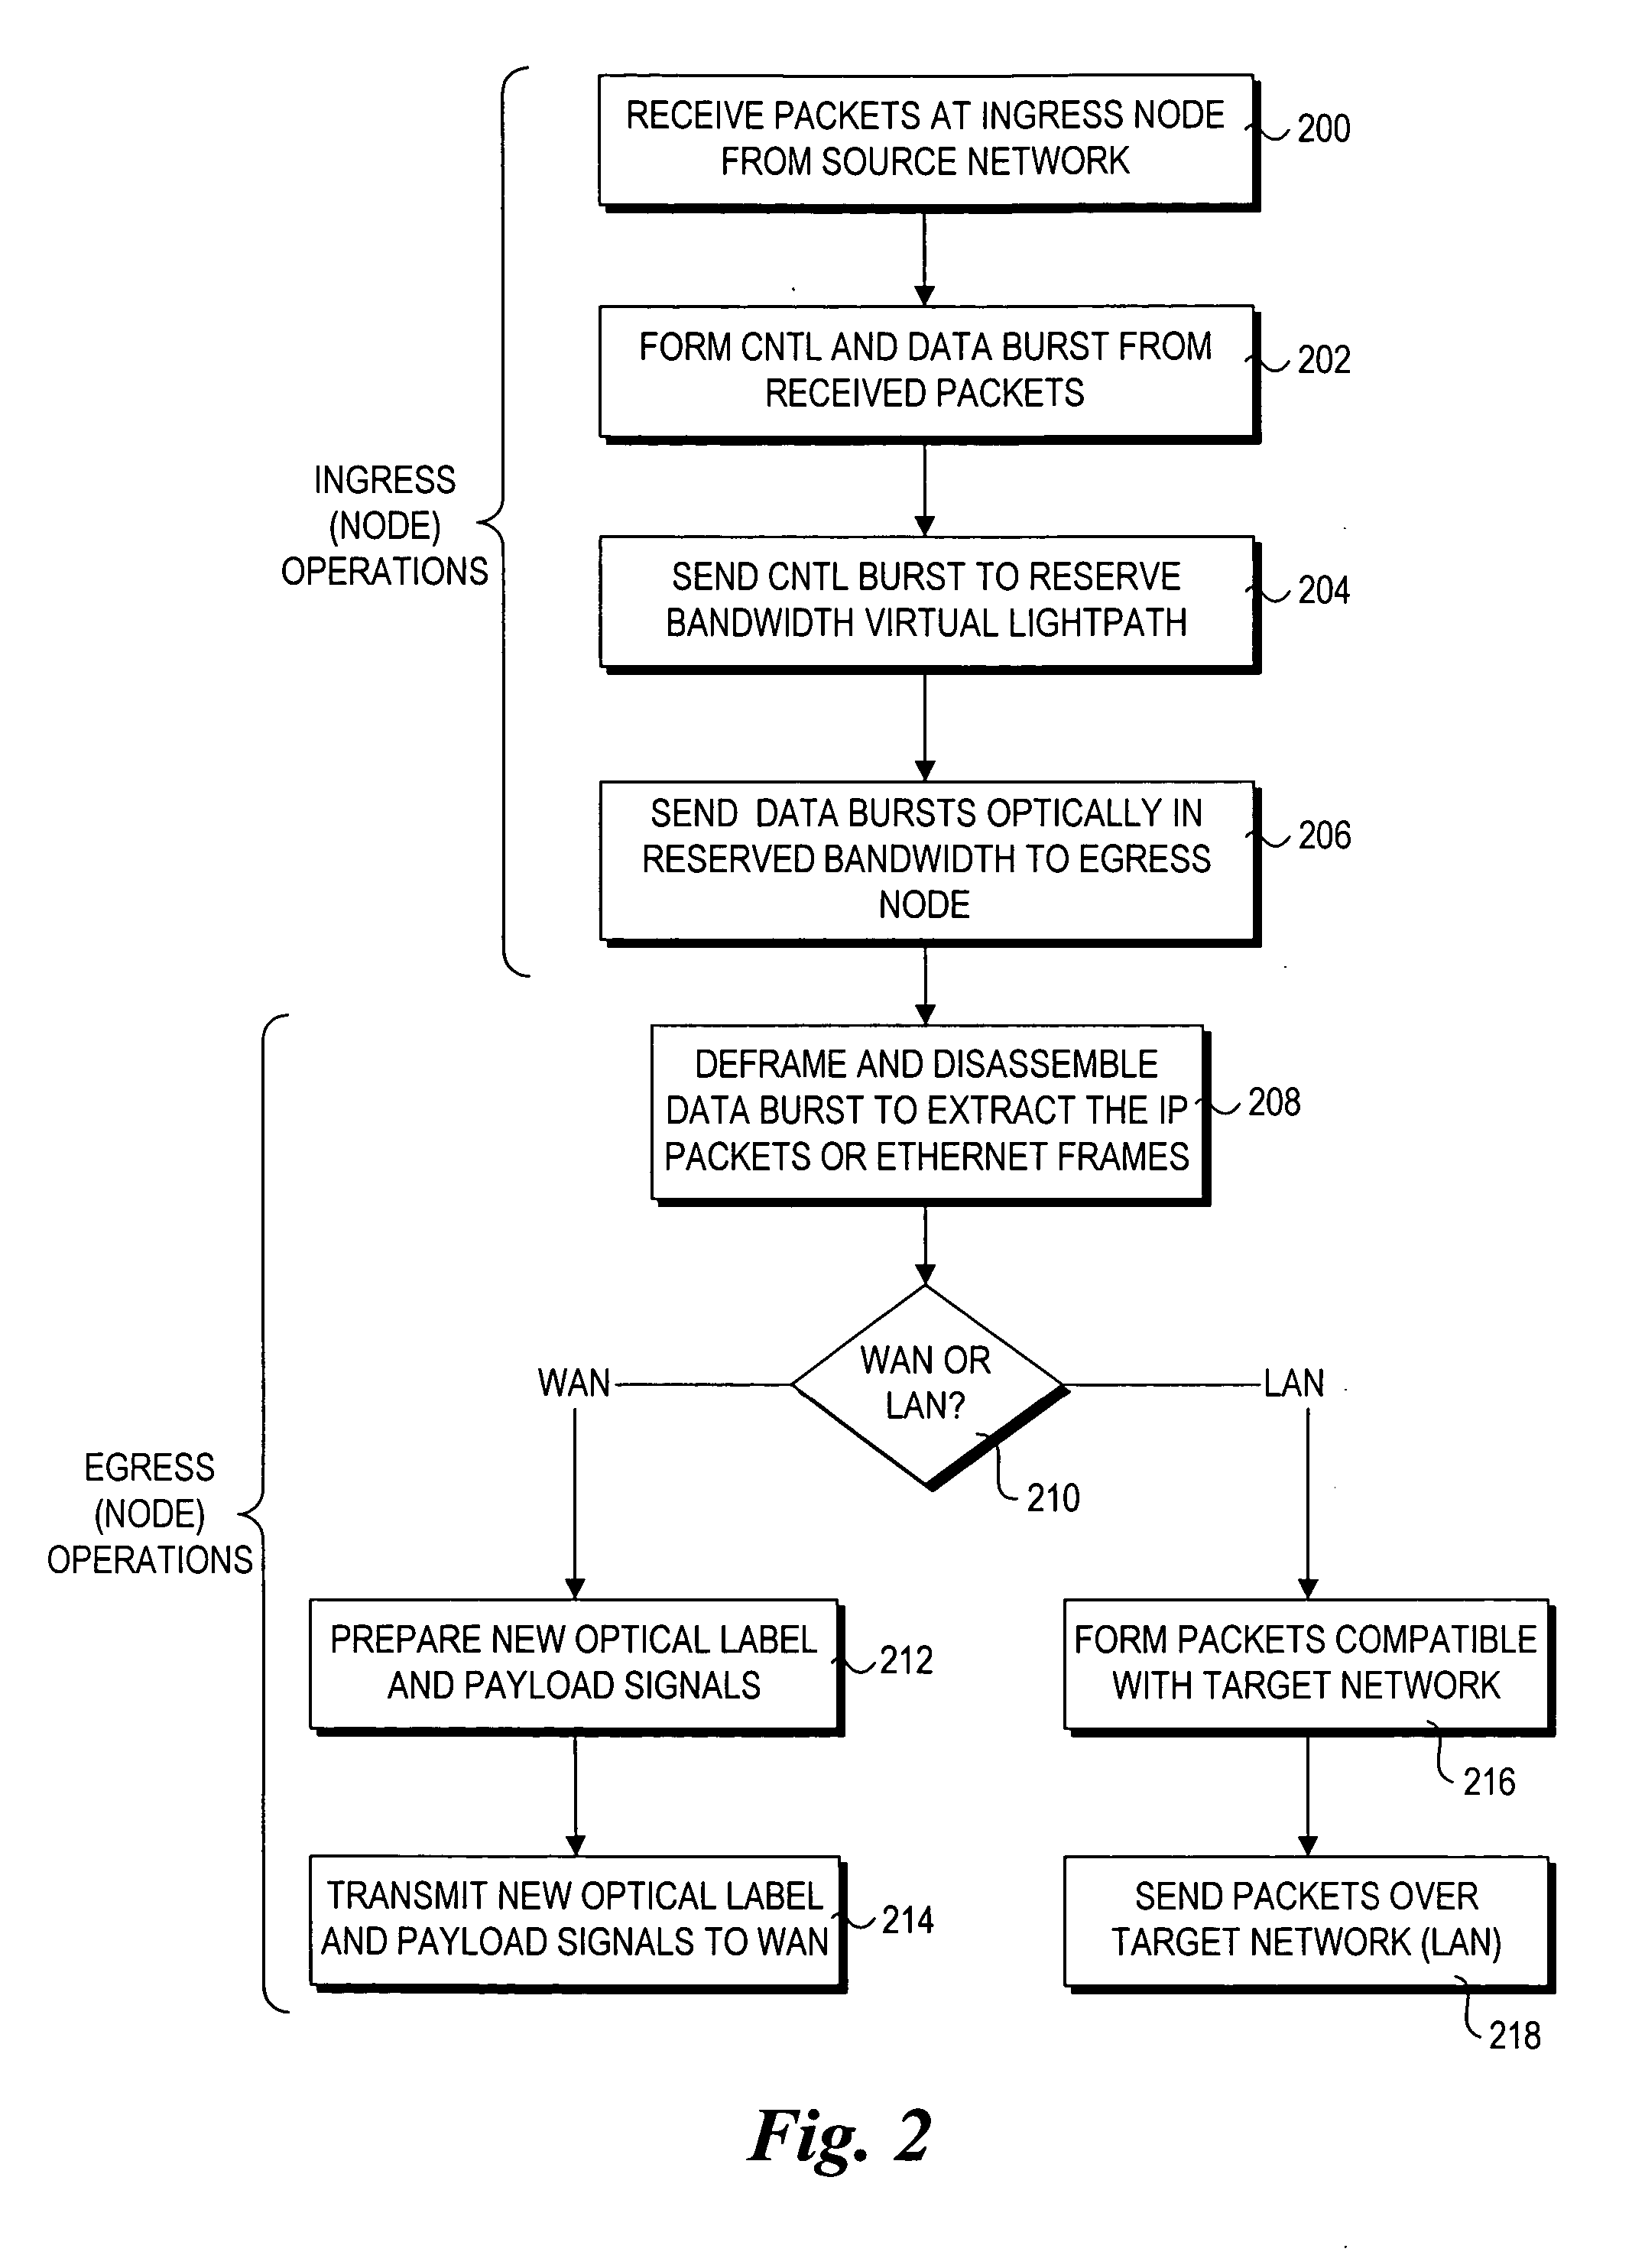 Method and architecture for security key generation and distribution within optical switched networks